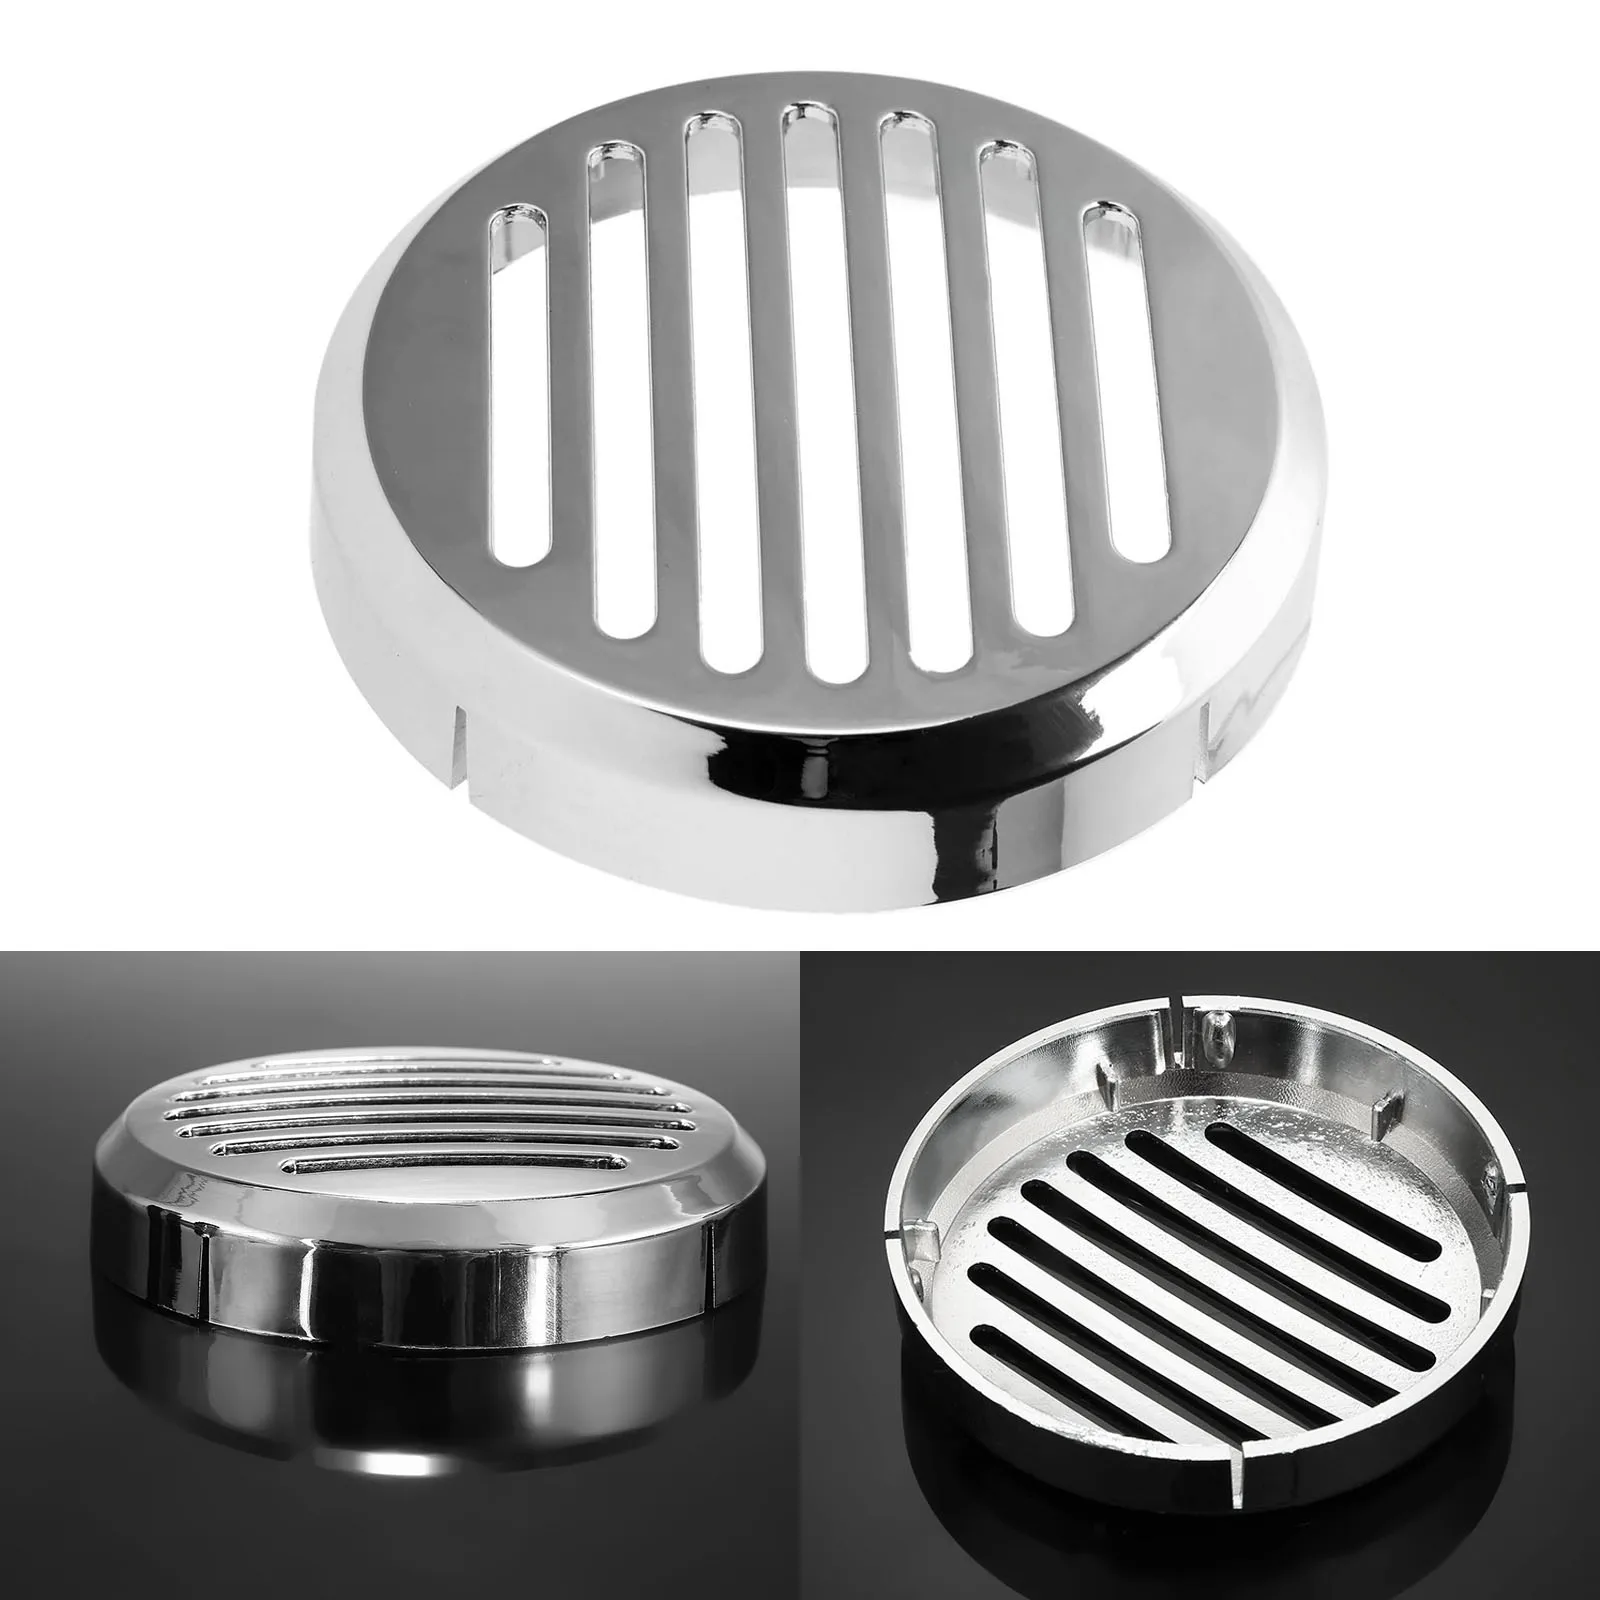 3.5" Motorcycle Chrome Round Slotted Grille Horn Cover for Honda Cruiser Bikes Shadow VT 1100 Sabre VTX 1300 C and VTX 1800 C